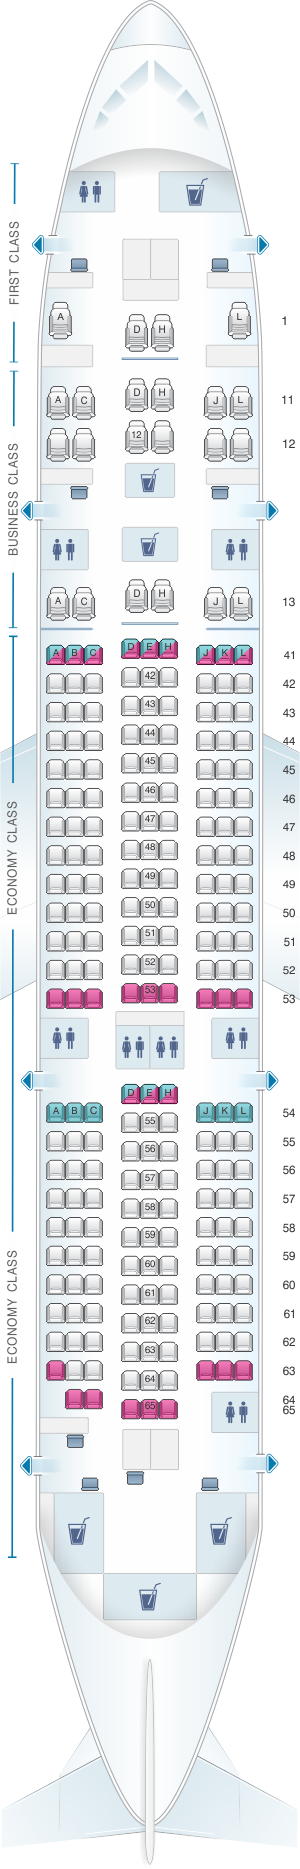 Seat map for Xiamen Airlines Boeing B787-8